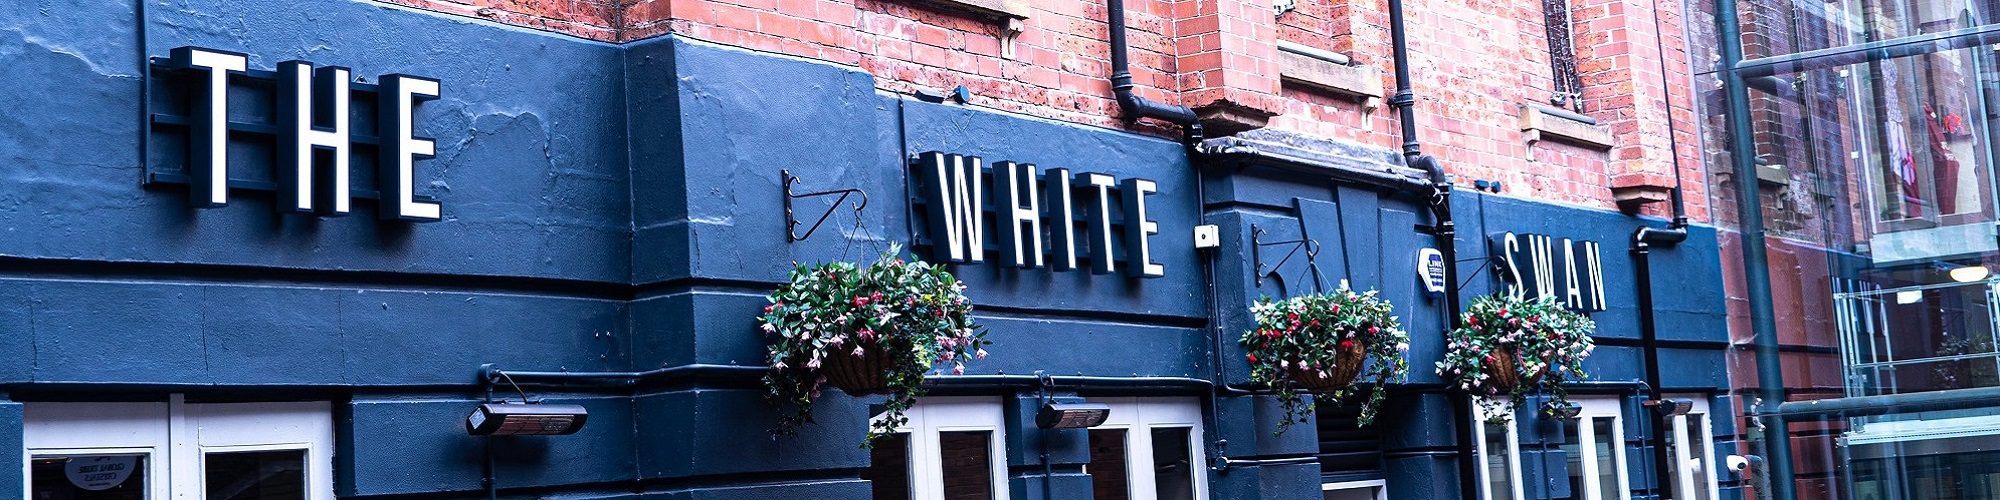 The White Swan exterior cropped